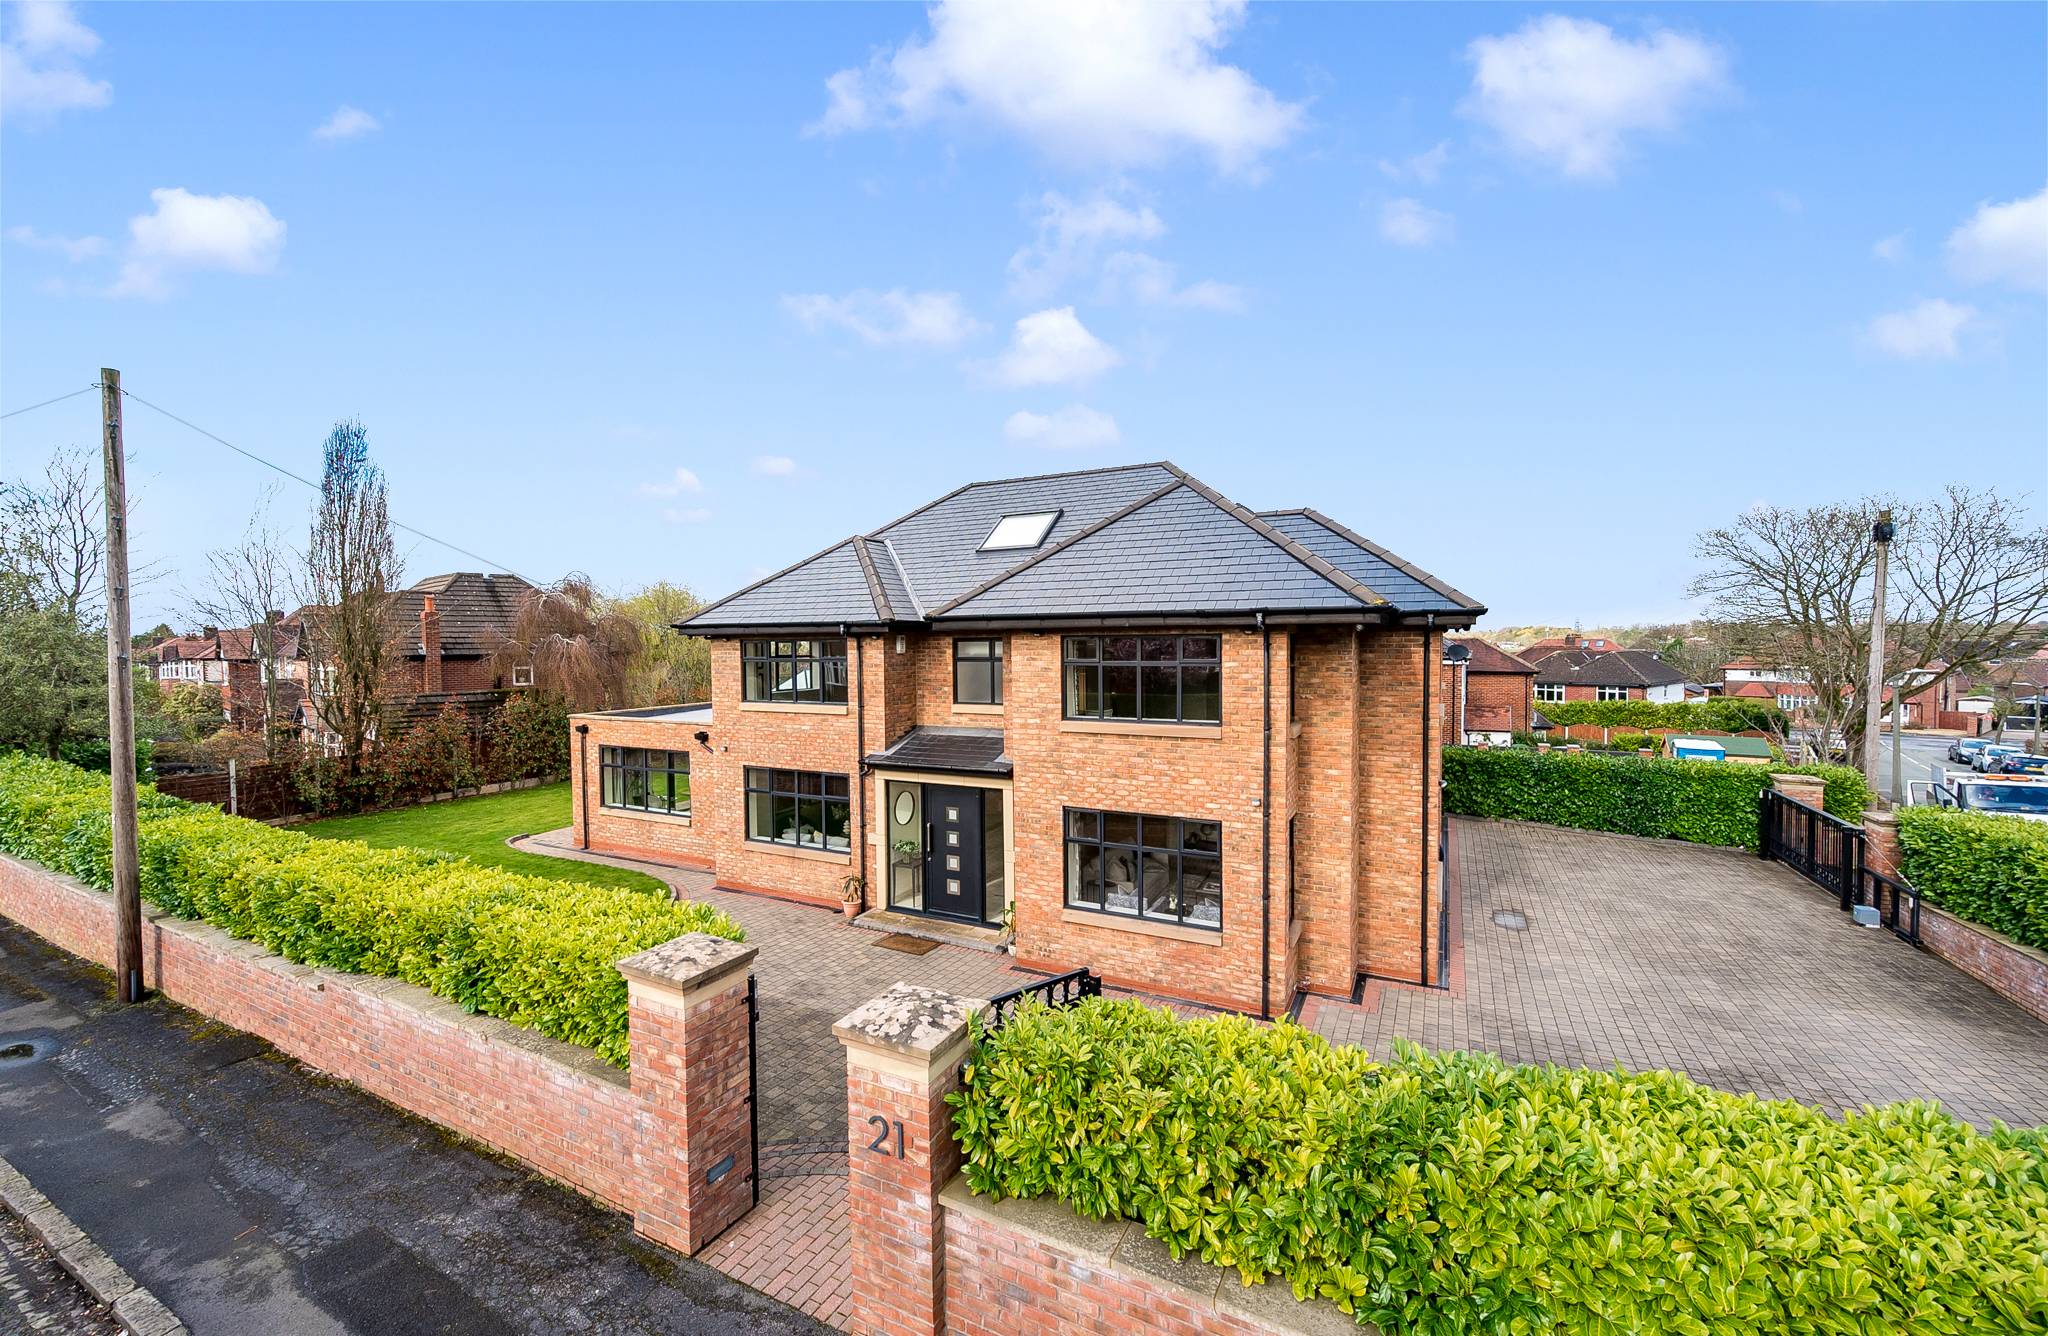 NO ONWARD CHAIN - A REMARKABLE CONTEMPORARY 6 BED DETACHED RESIDENCE WITH AROUND 4500SQFT OF LIVING SPACE AND DAZZLING NATURAL LIGHT